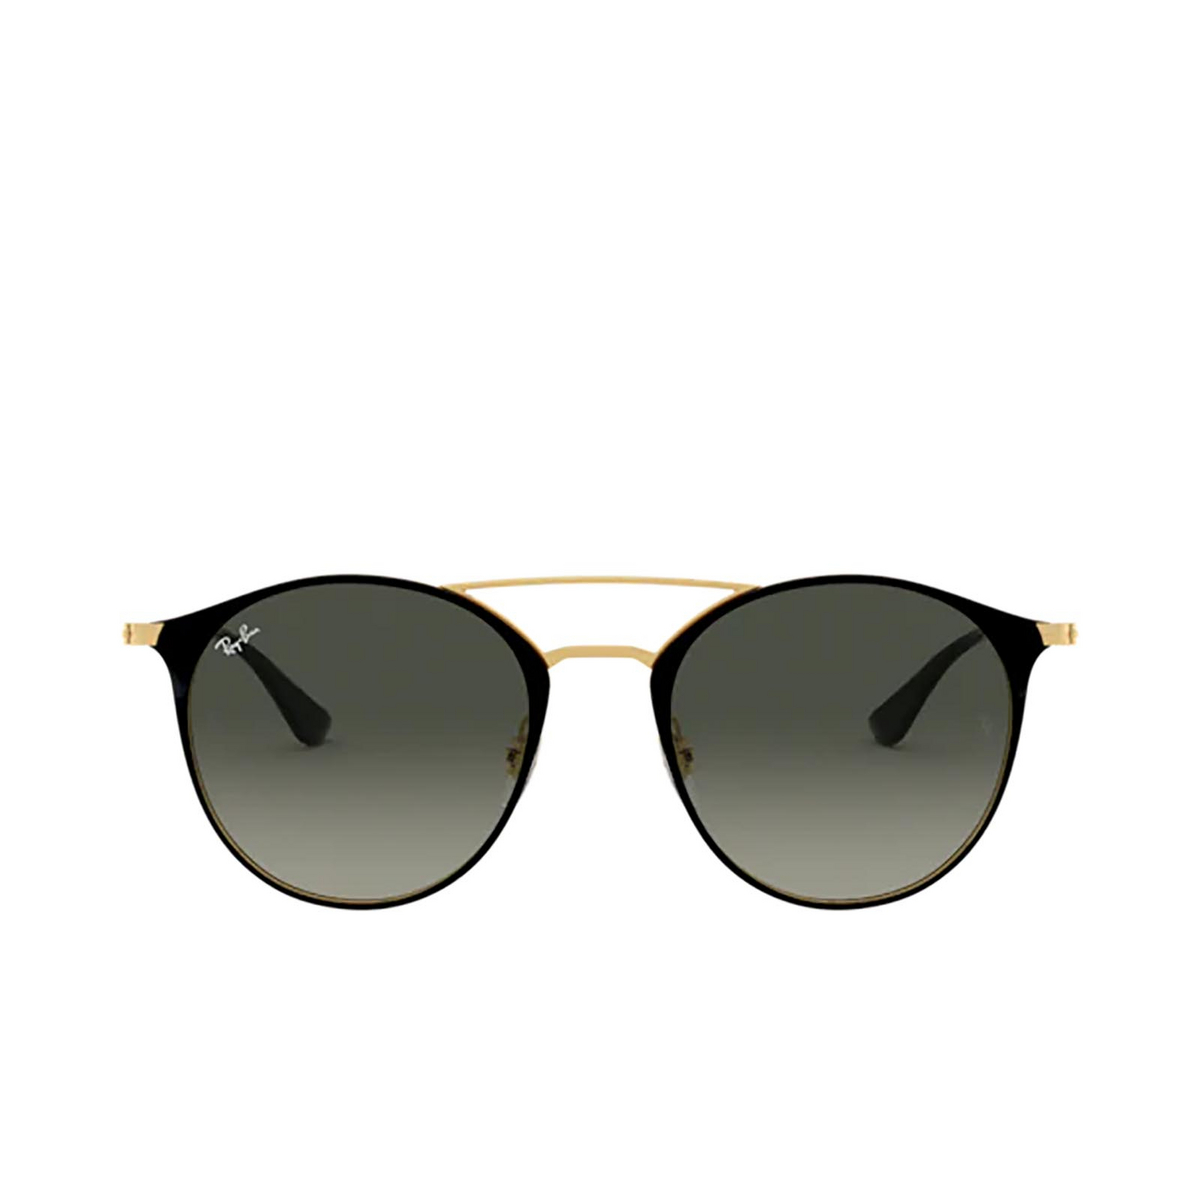 Ray-Ban® Round Sunglasses: RB3546 color Black On Arista 187/71 - front view.